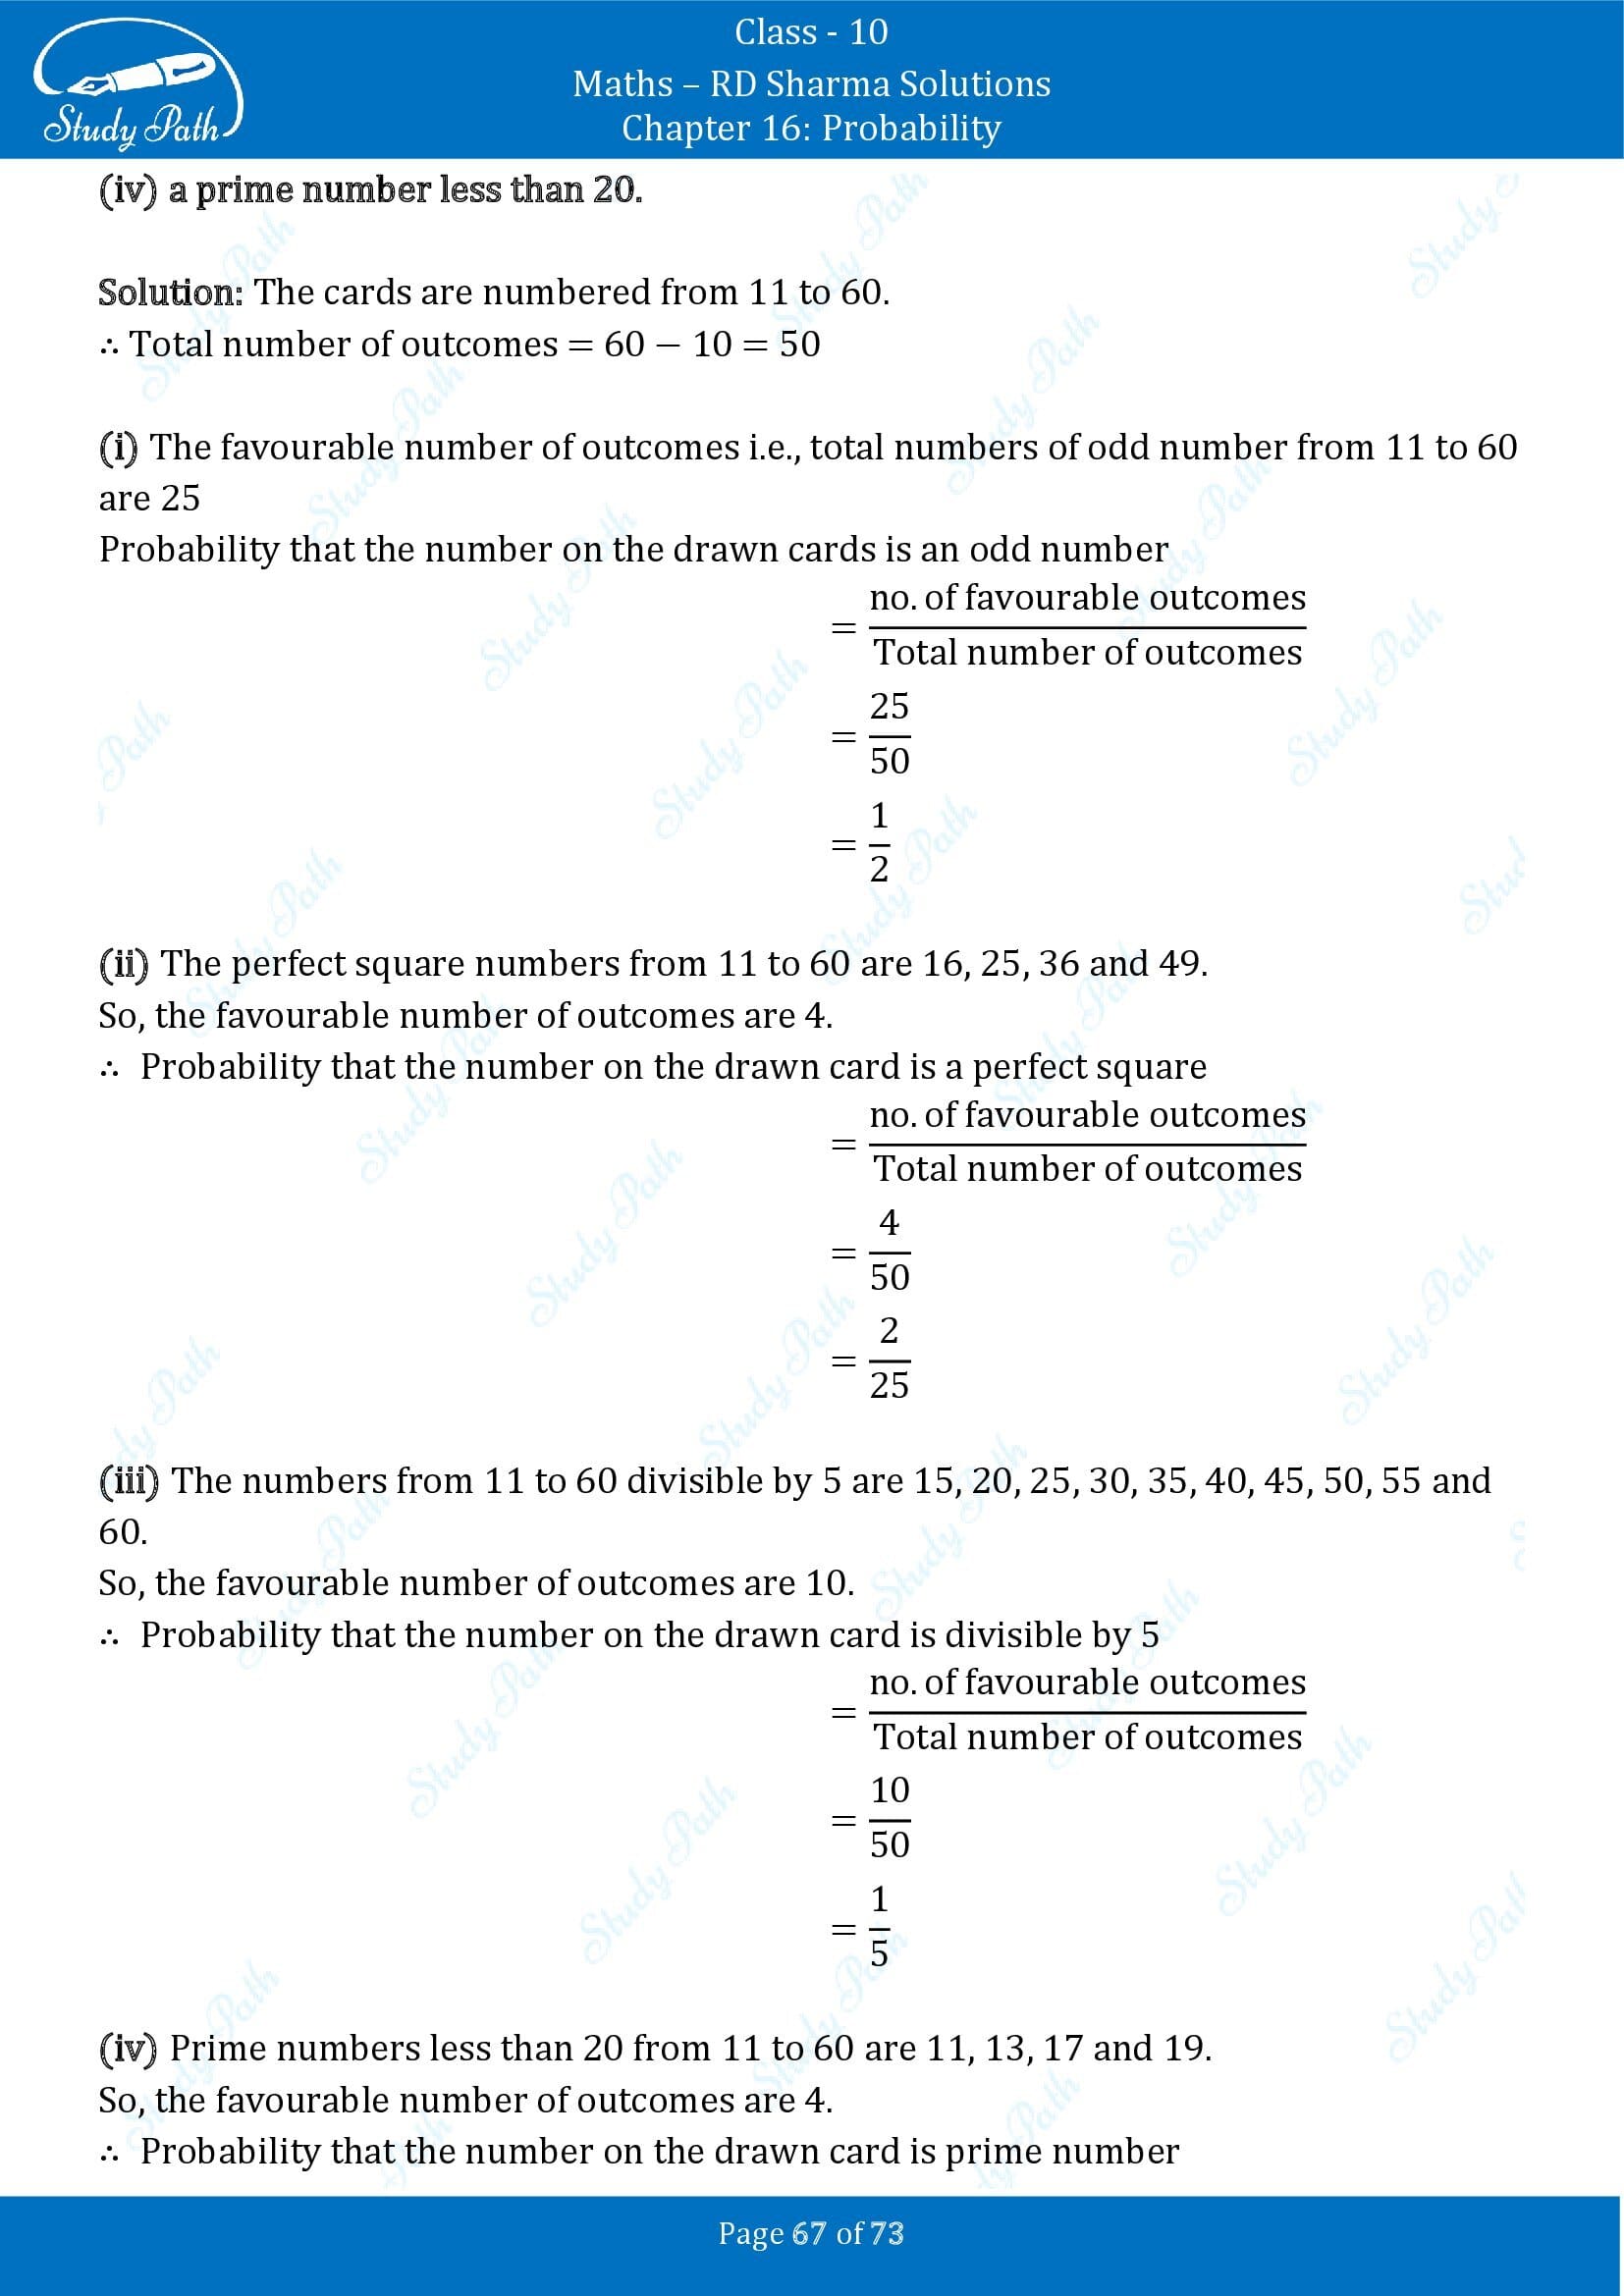 RD Sharma Solutions Class 10 Chapter 16 Probability Exercise 16.1 00067